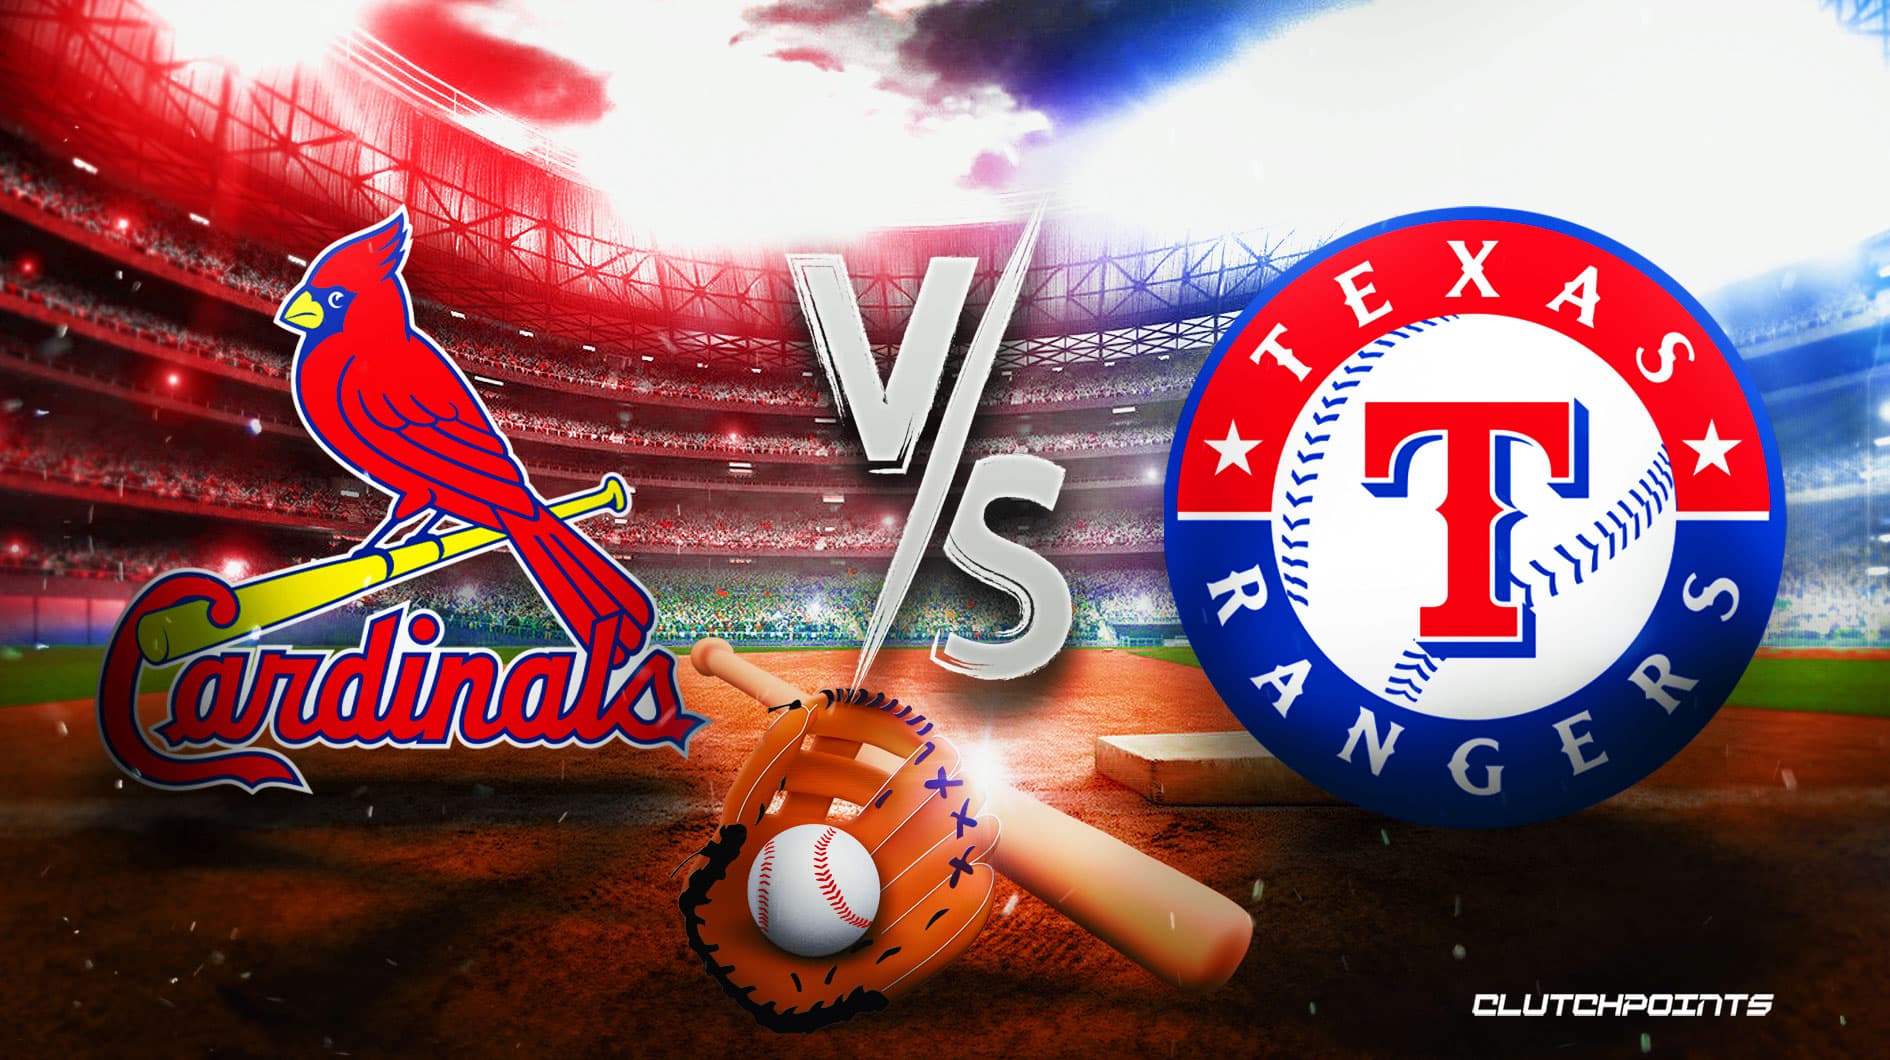 CardinalsRangers prediction, odds, pick, how to watch